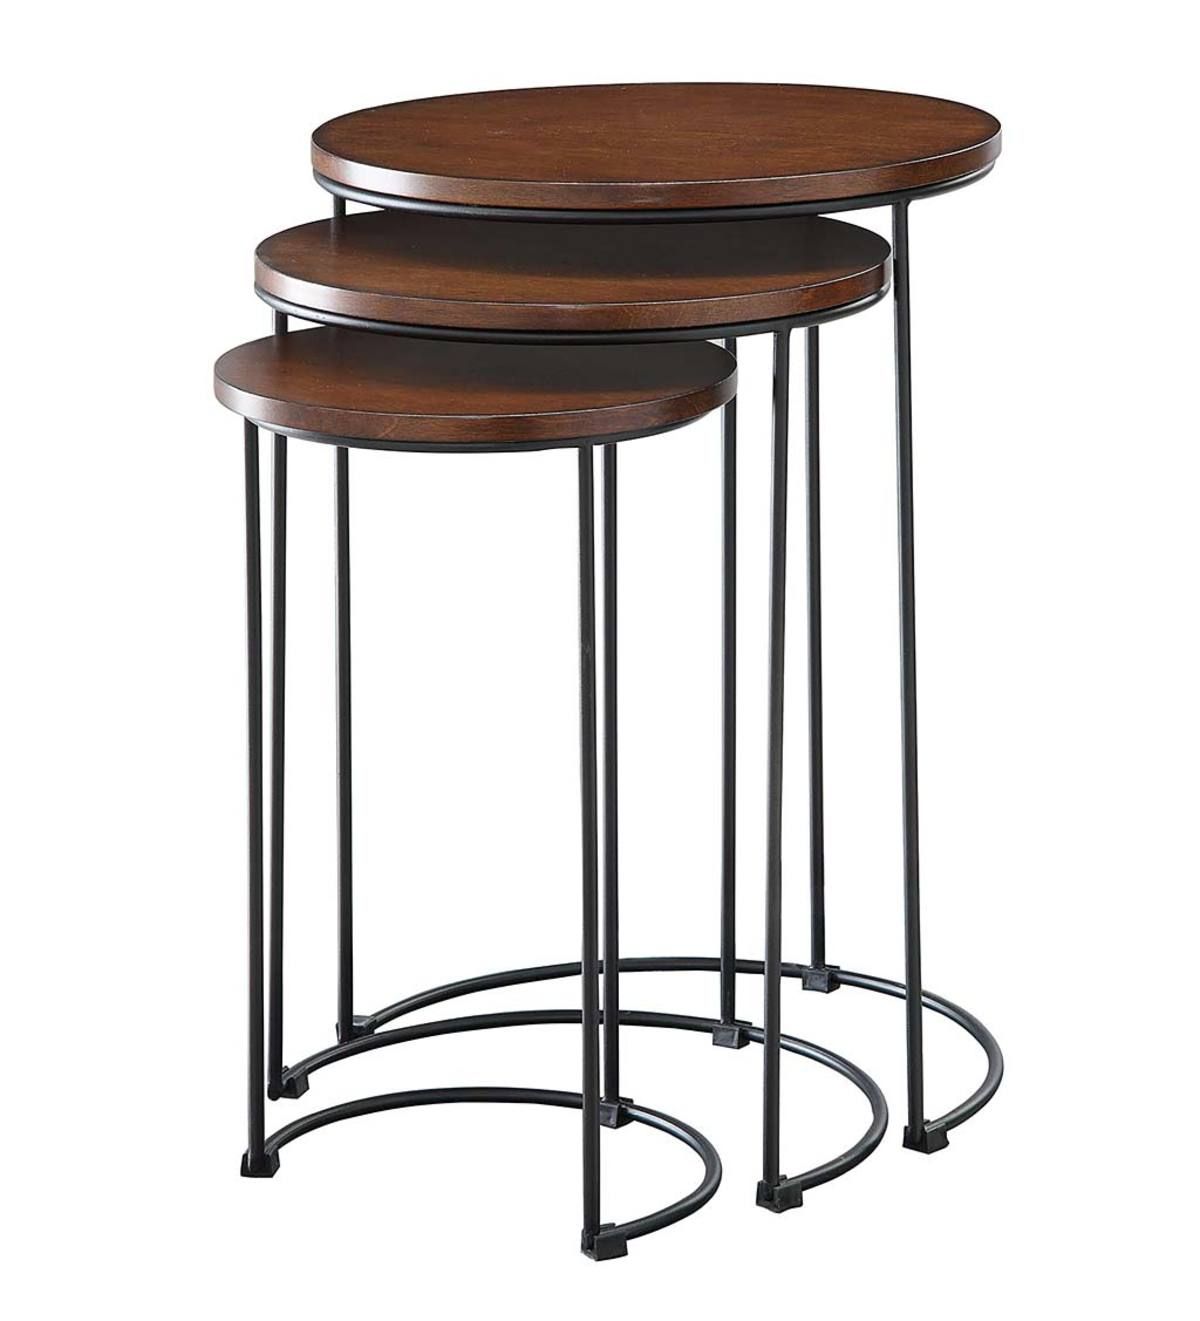 3 Piece Industrial Style Round Metal And Wood Nesting Tables – Chestnut With Regard To Trendy Wood And Steel Outdoor Side Tables (View 1 of 15)